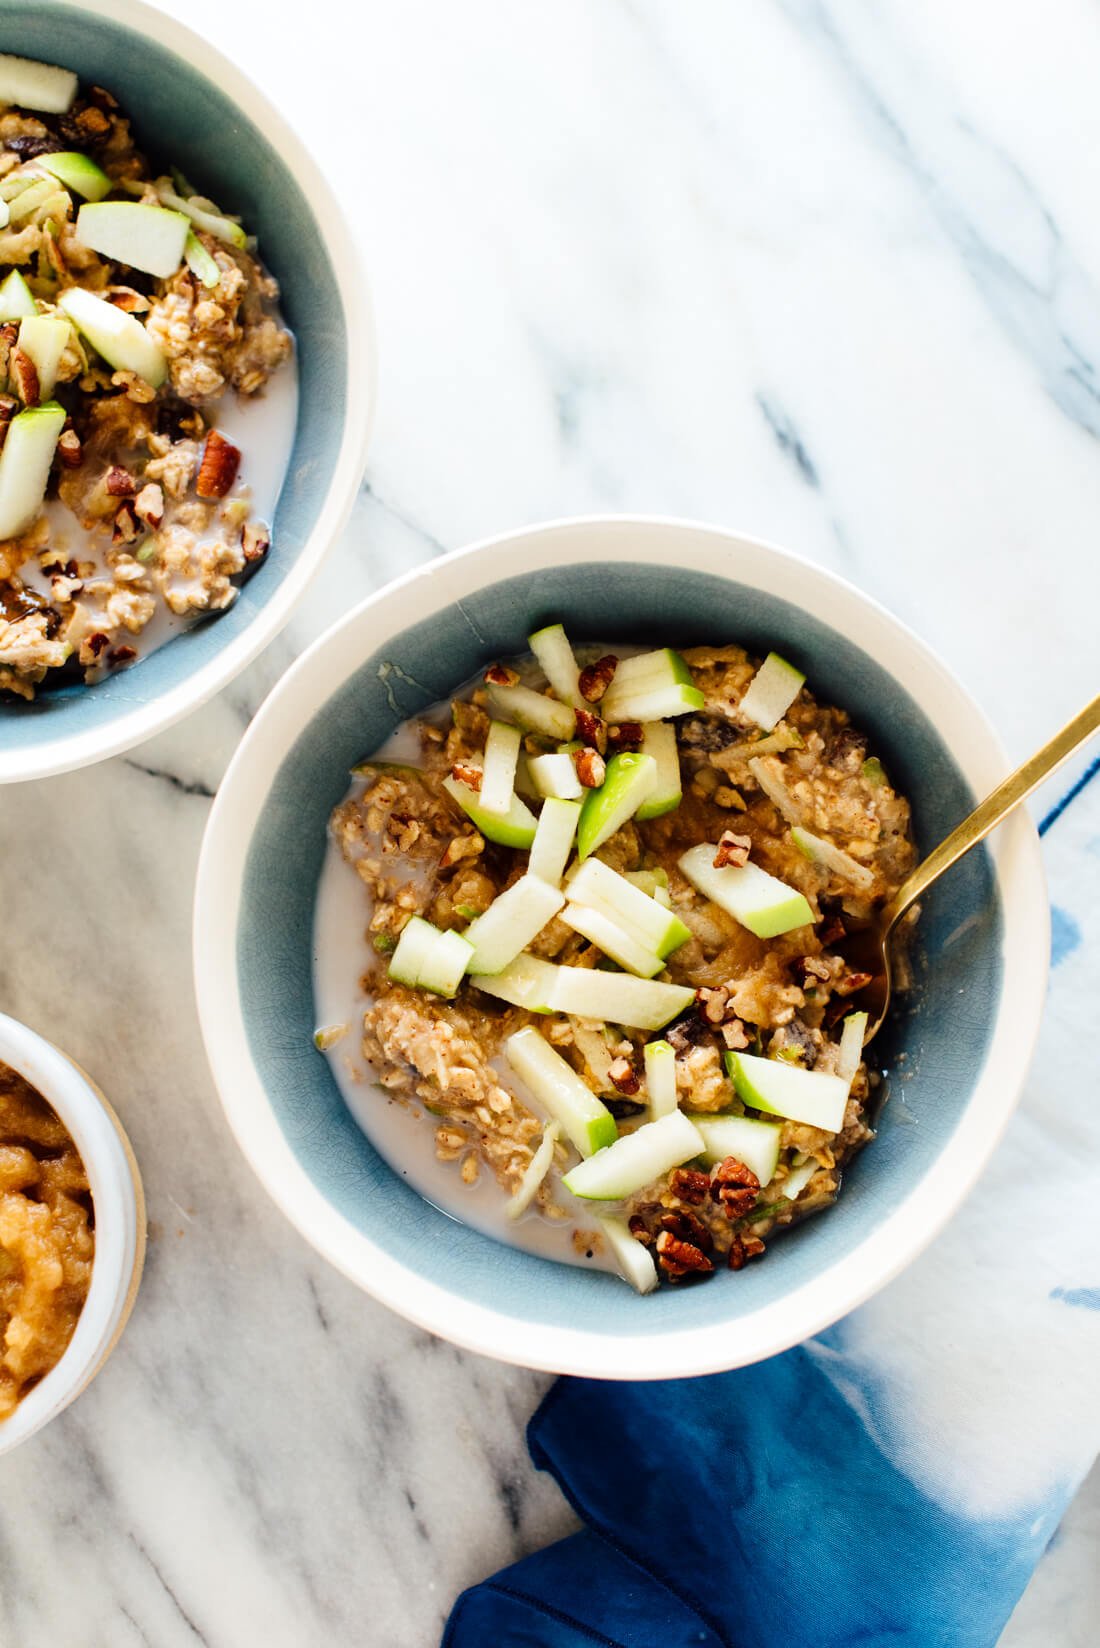 The best bircher muesli recipe! This healthy make-ahead breakfast will keep you fueled through the holidays.